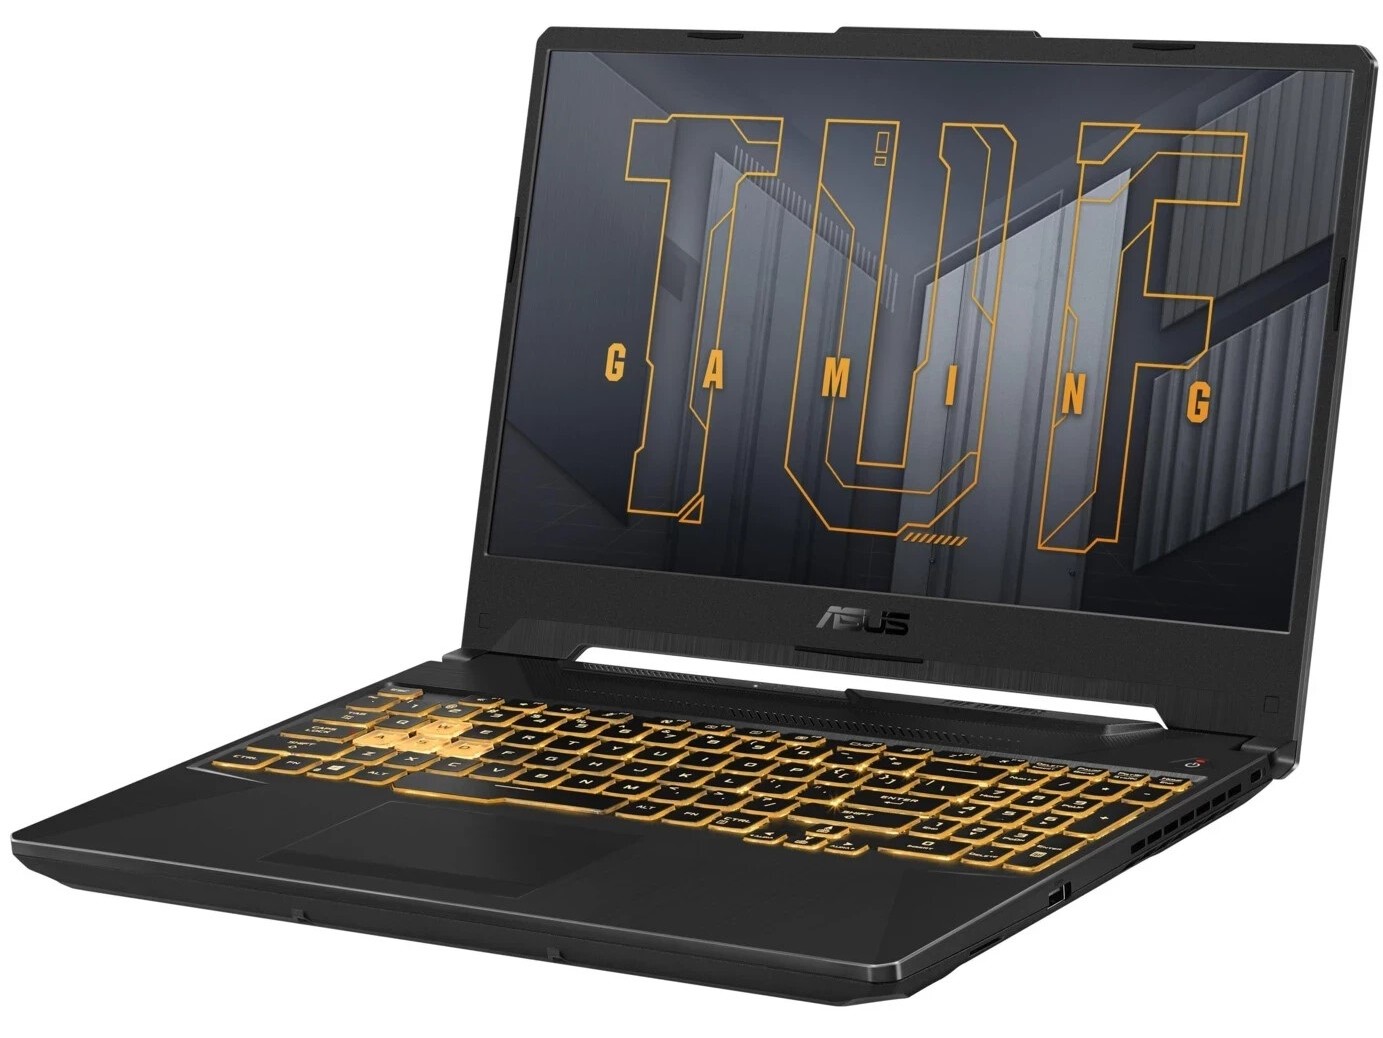 Asus TUF Gaming A15: Budget gaming laptop with AMD processor - NotebookCheck.net Reviews